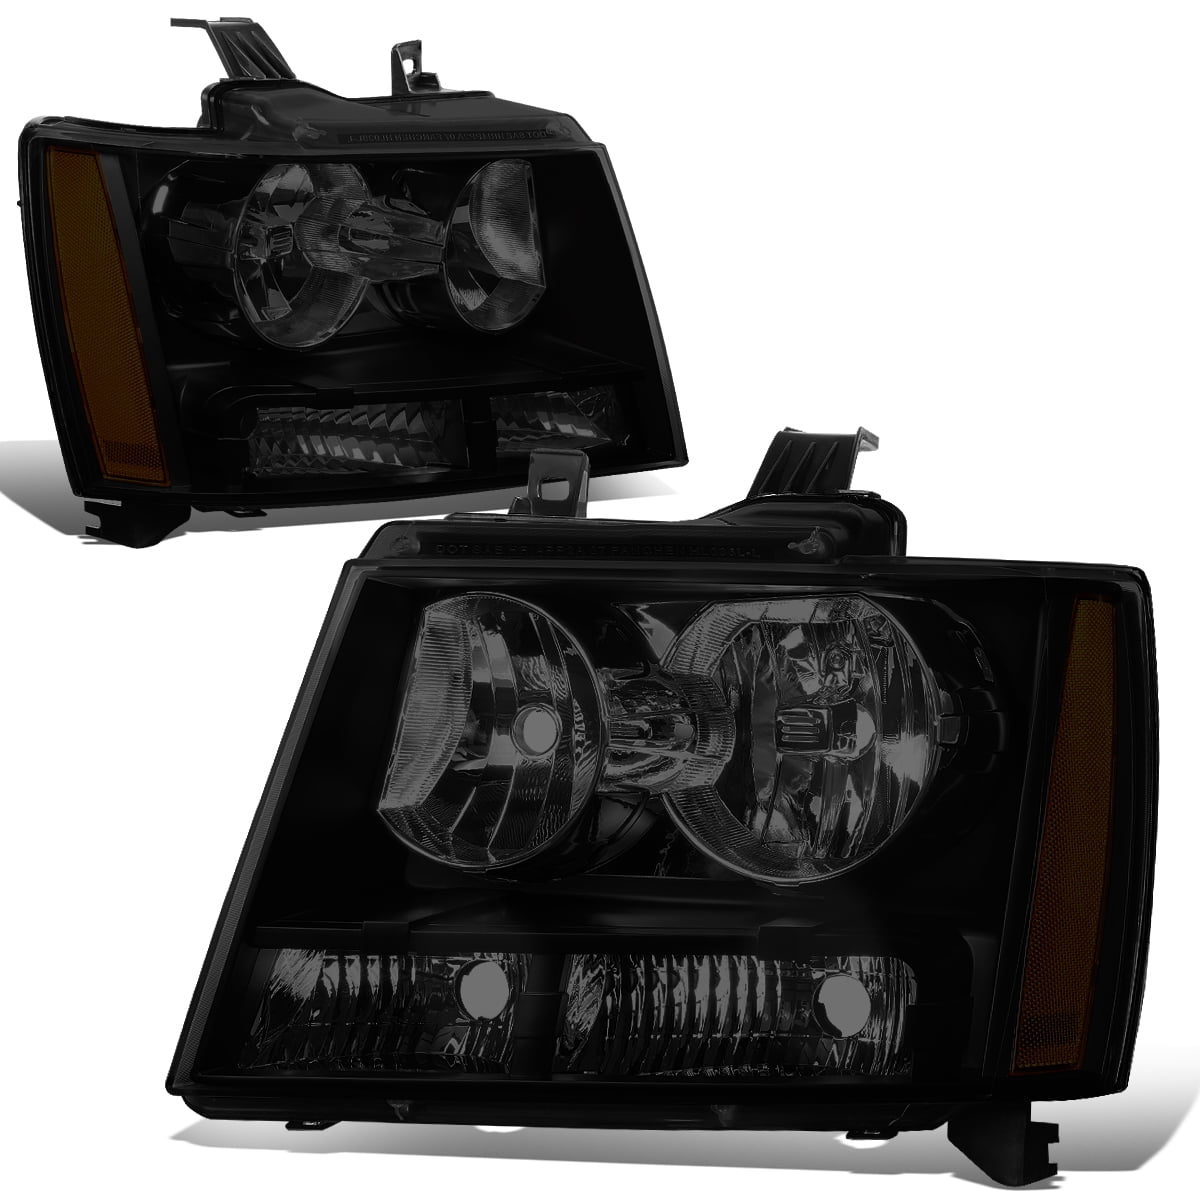 DNA Motoring HL-OH-CSA07-BK-SM-AM Smoke Lens Amber Headlights Replacement For 07-14 Tahoe Suburban Avalanche 